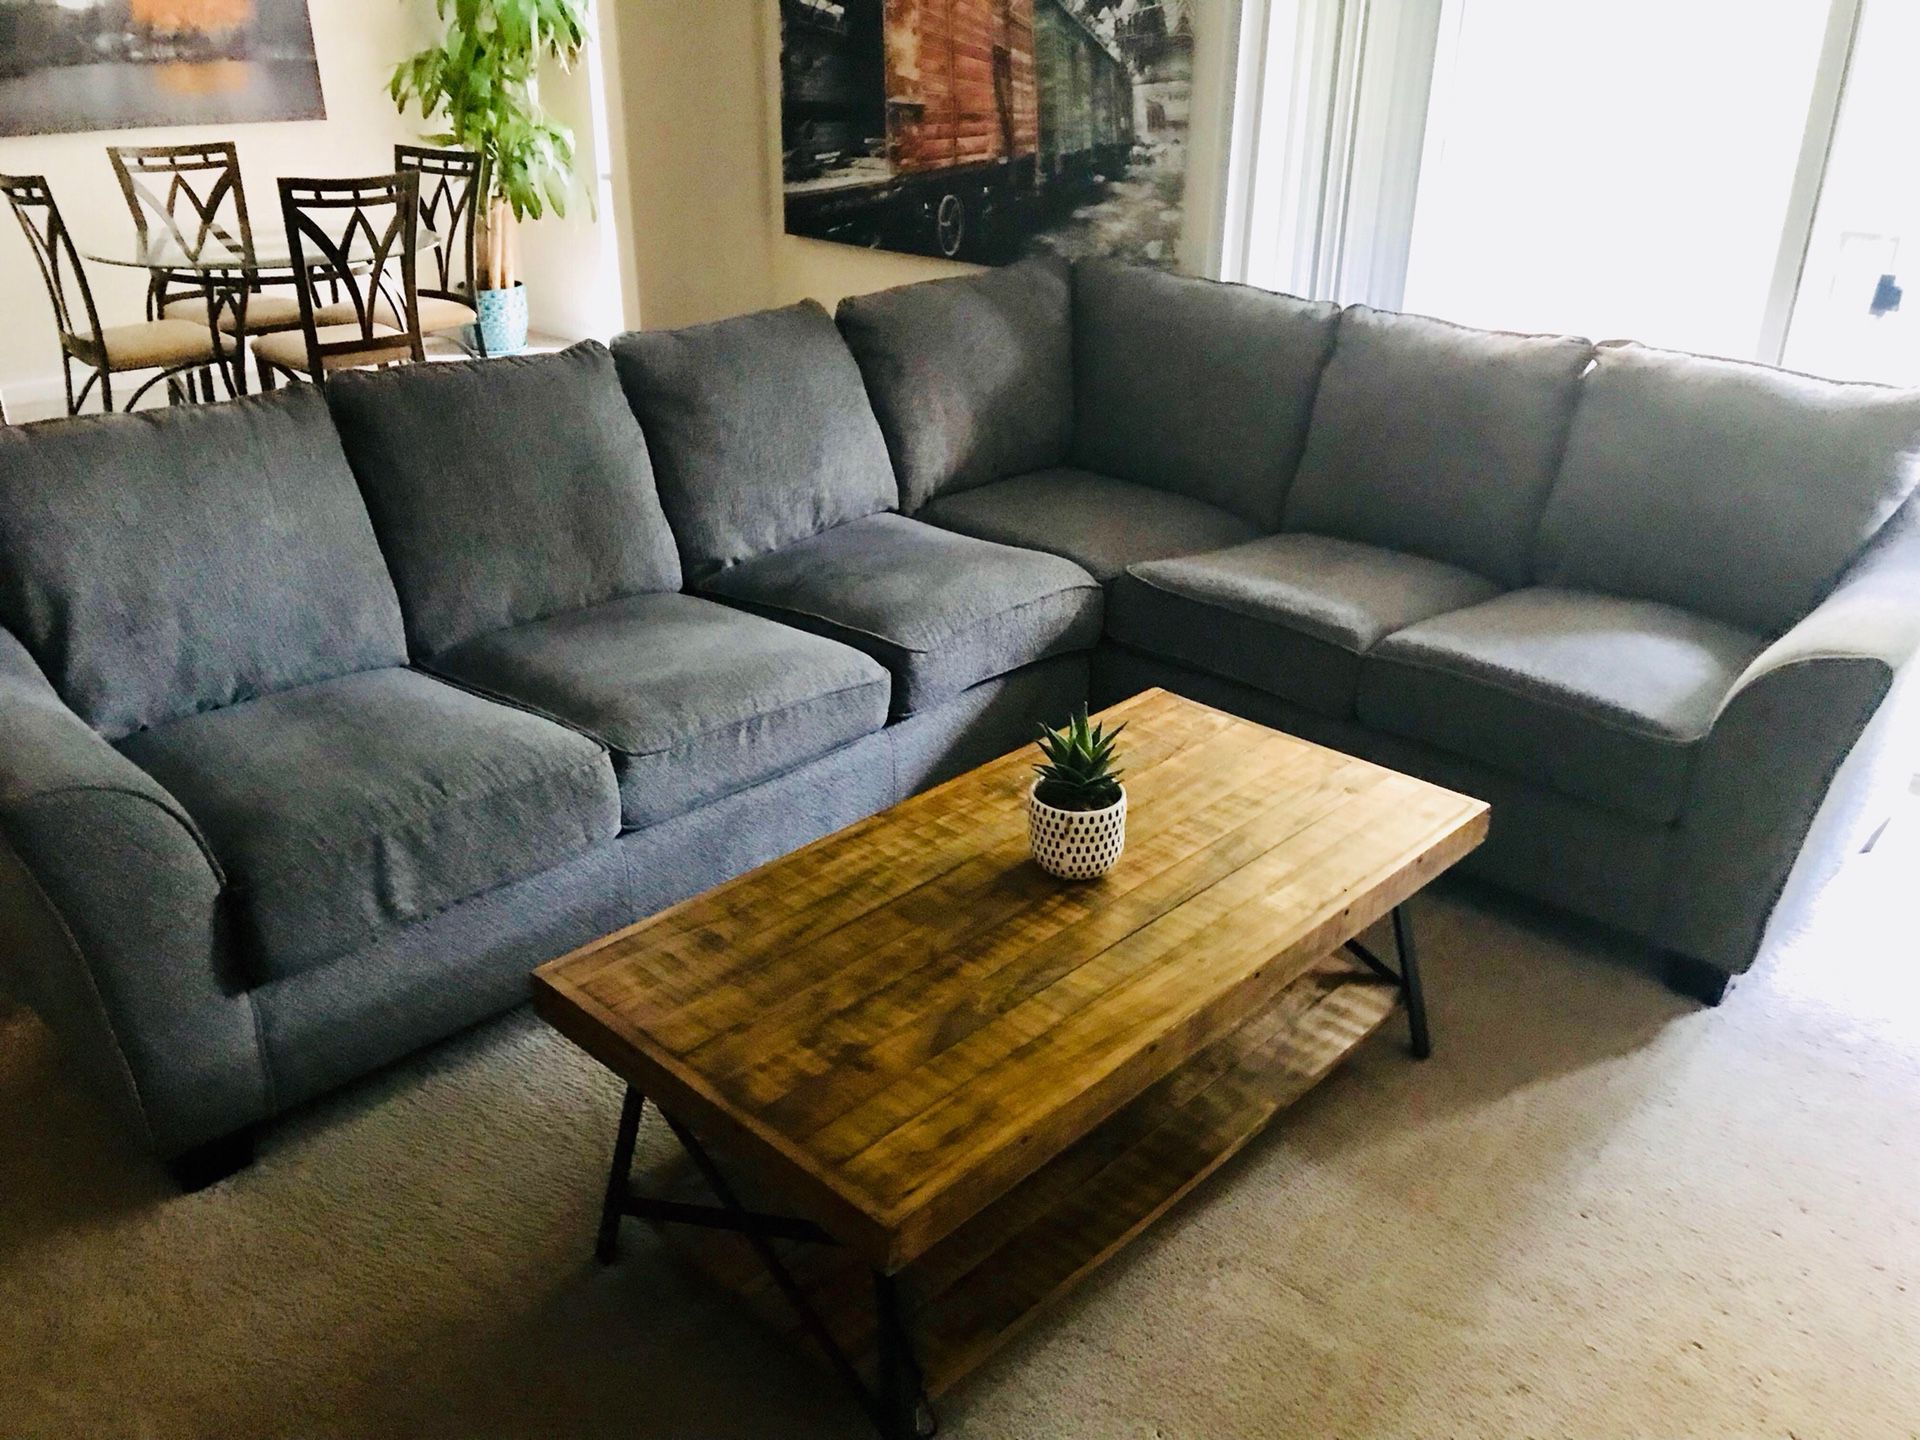 MATCHING TV CONSOLE & COFFEE TABLE - NEED GONE TODAY